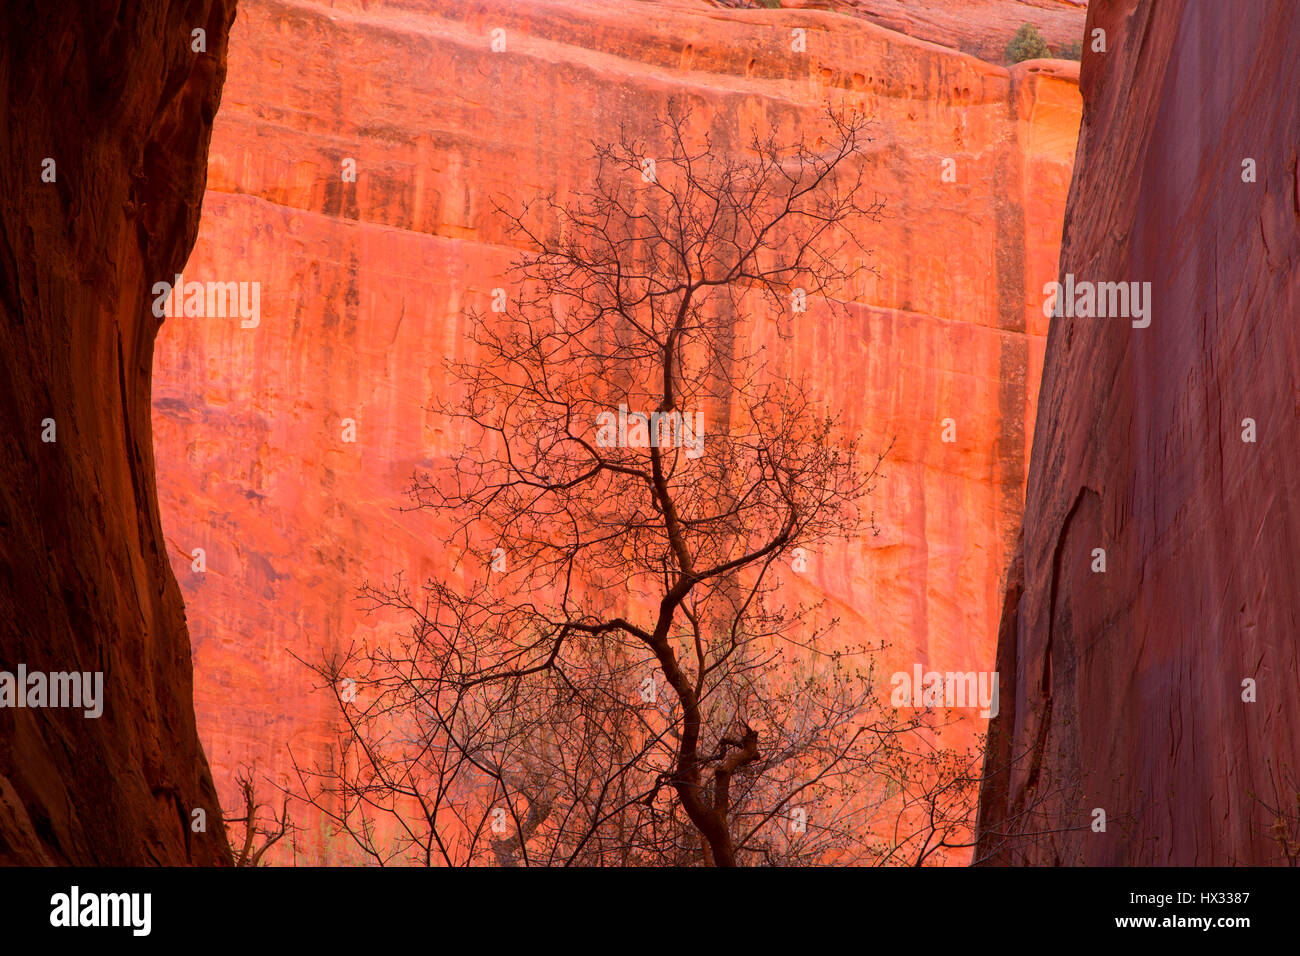 Cottonwood in Long Canyon slot, Grand Staircase - Escalante National Monument, Burr Trail Scenic Byway, Utah Stock Photo